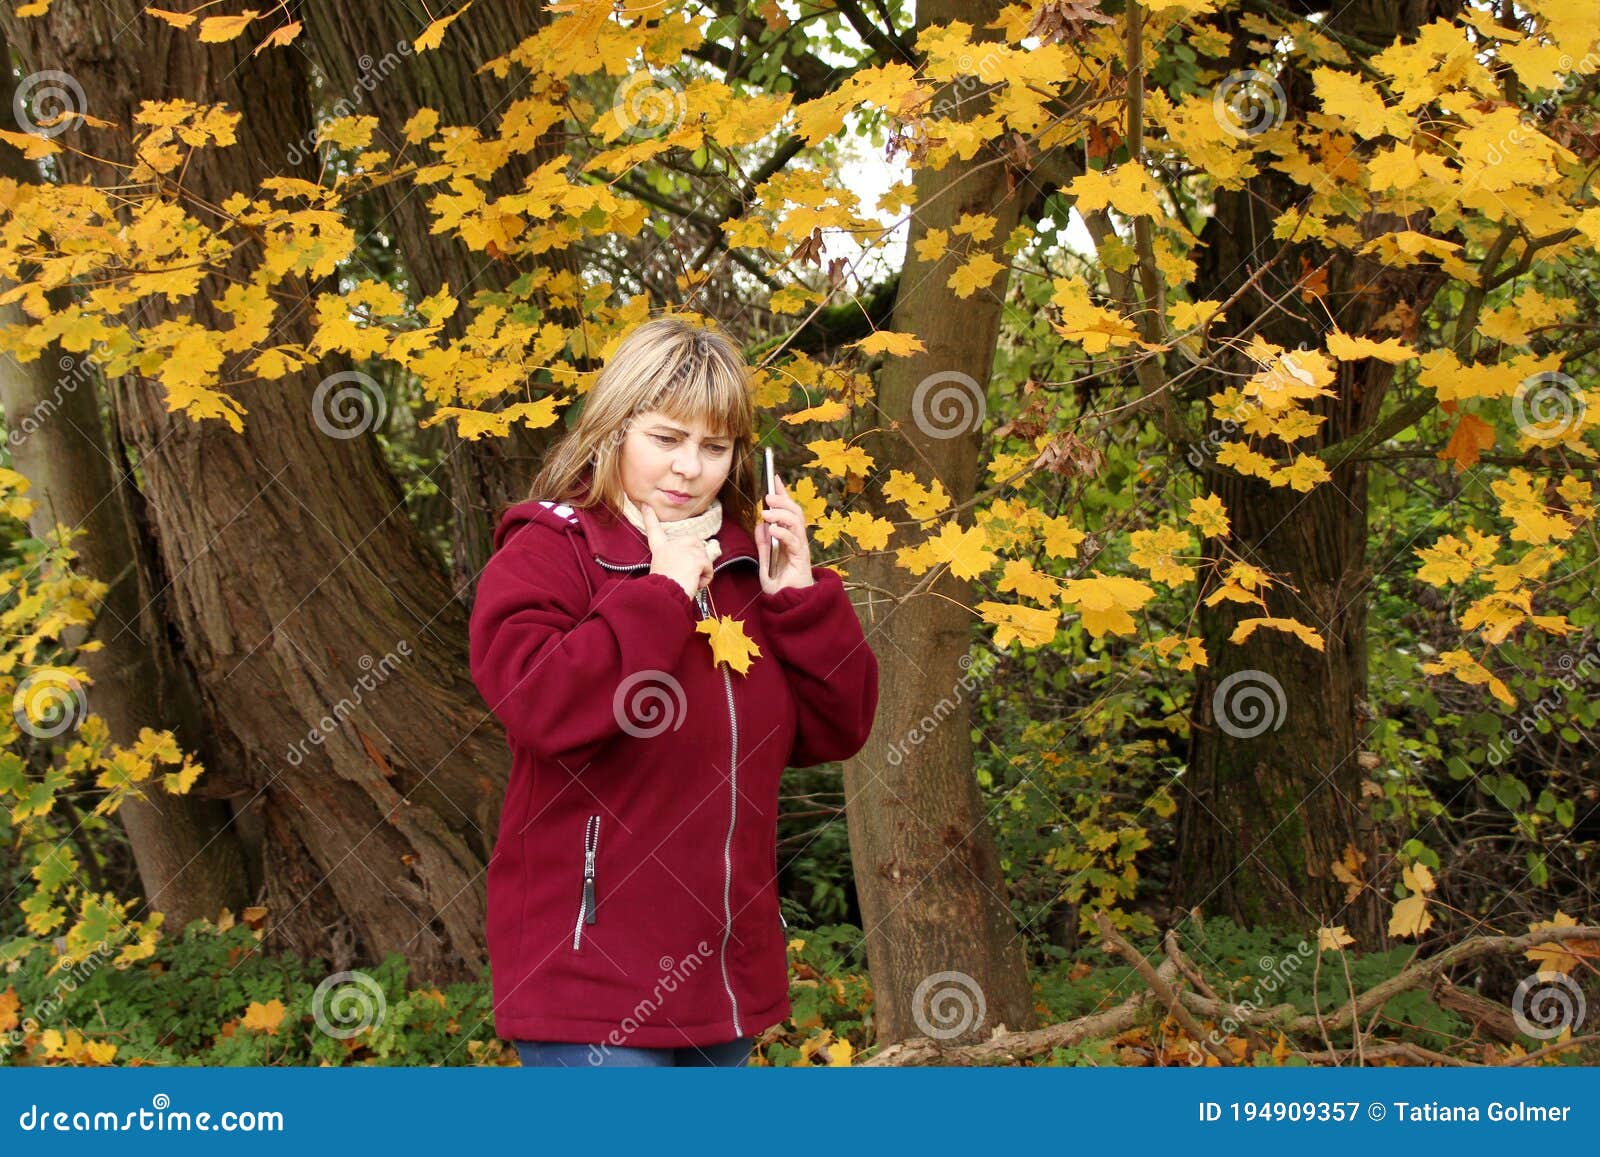 Woman in a Burgundy Fleece Jacket Talking on the Phone in an Autumn ...